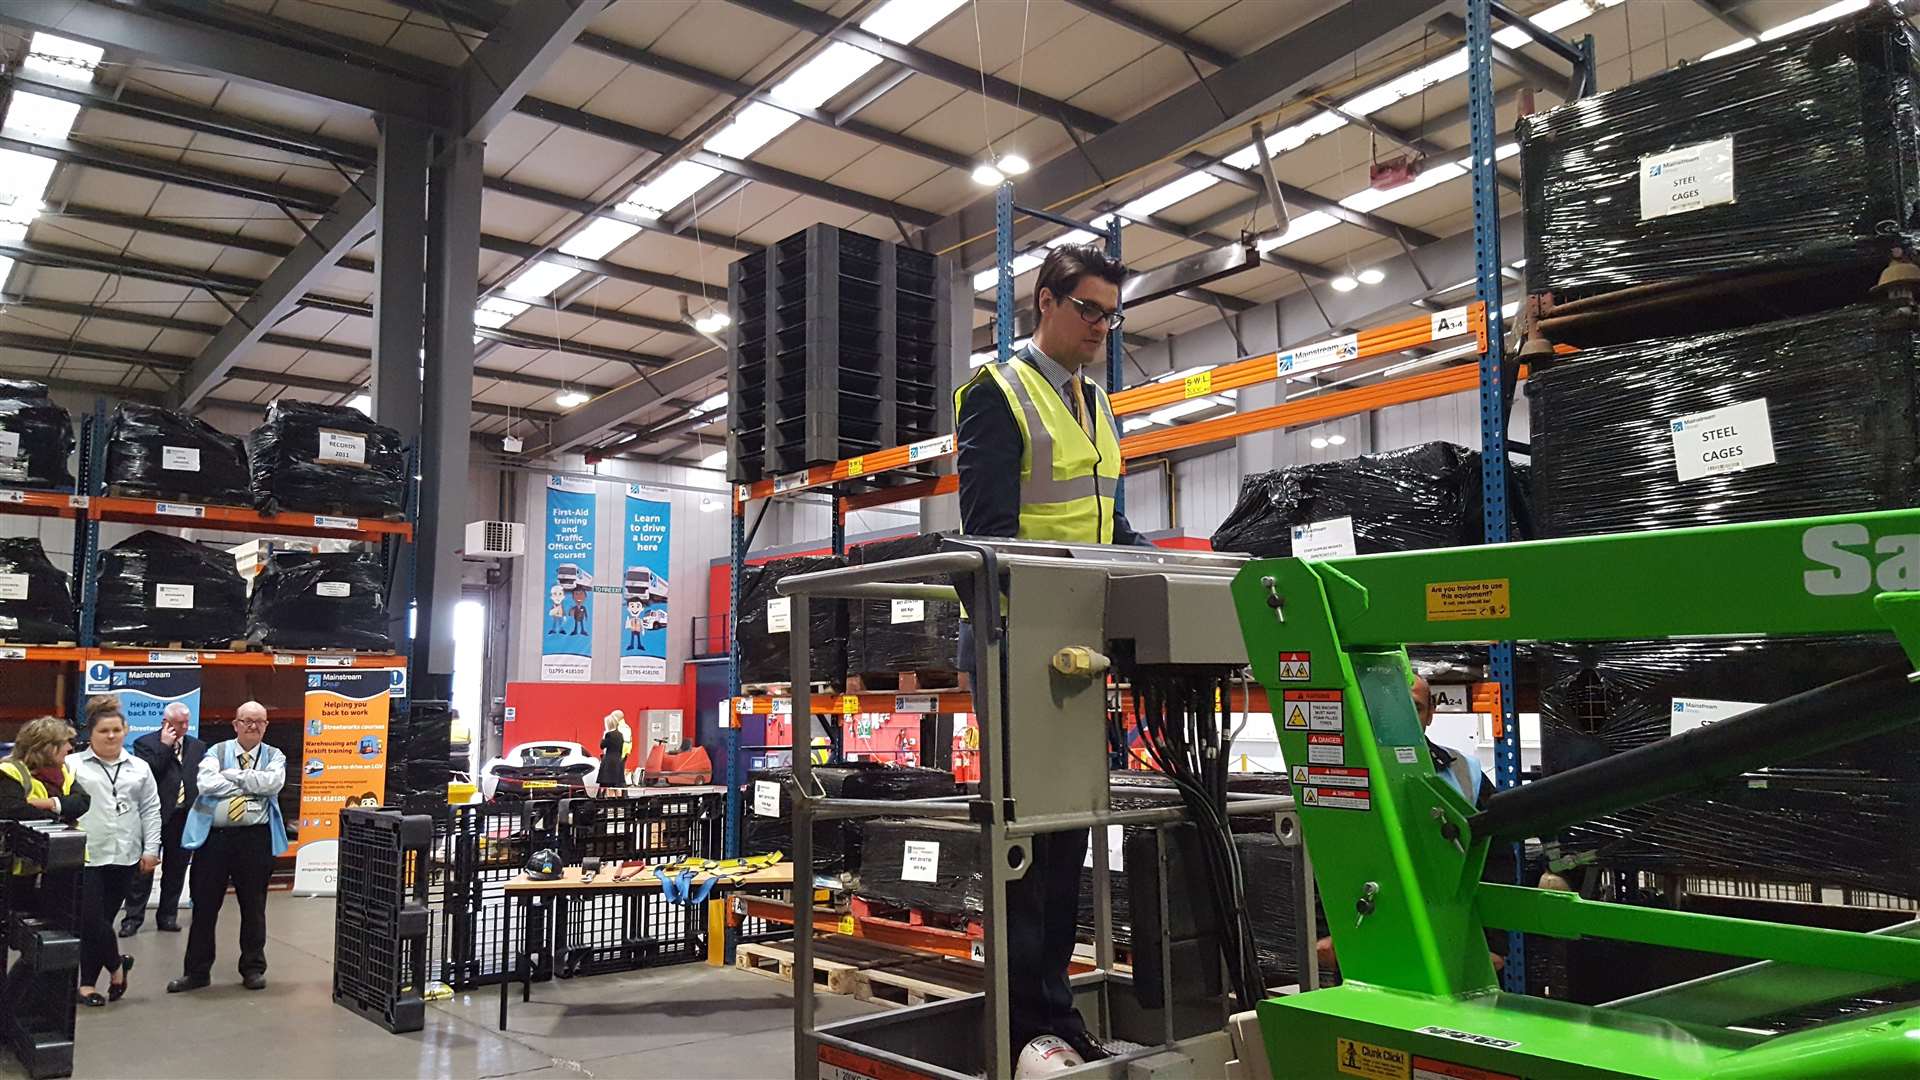 Chris Price learns to operate a cherry picker